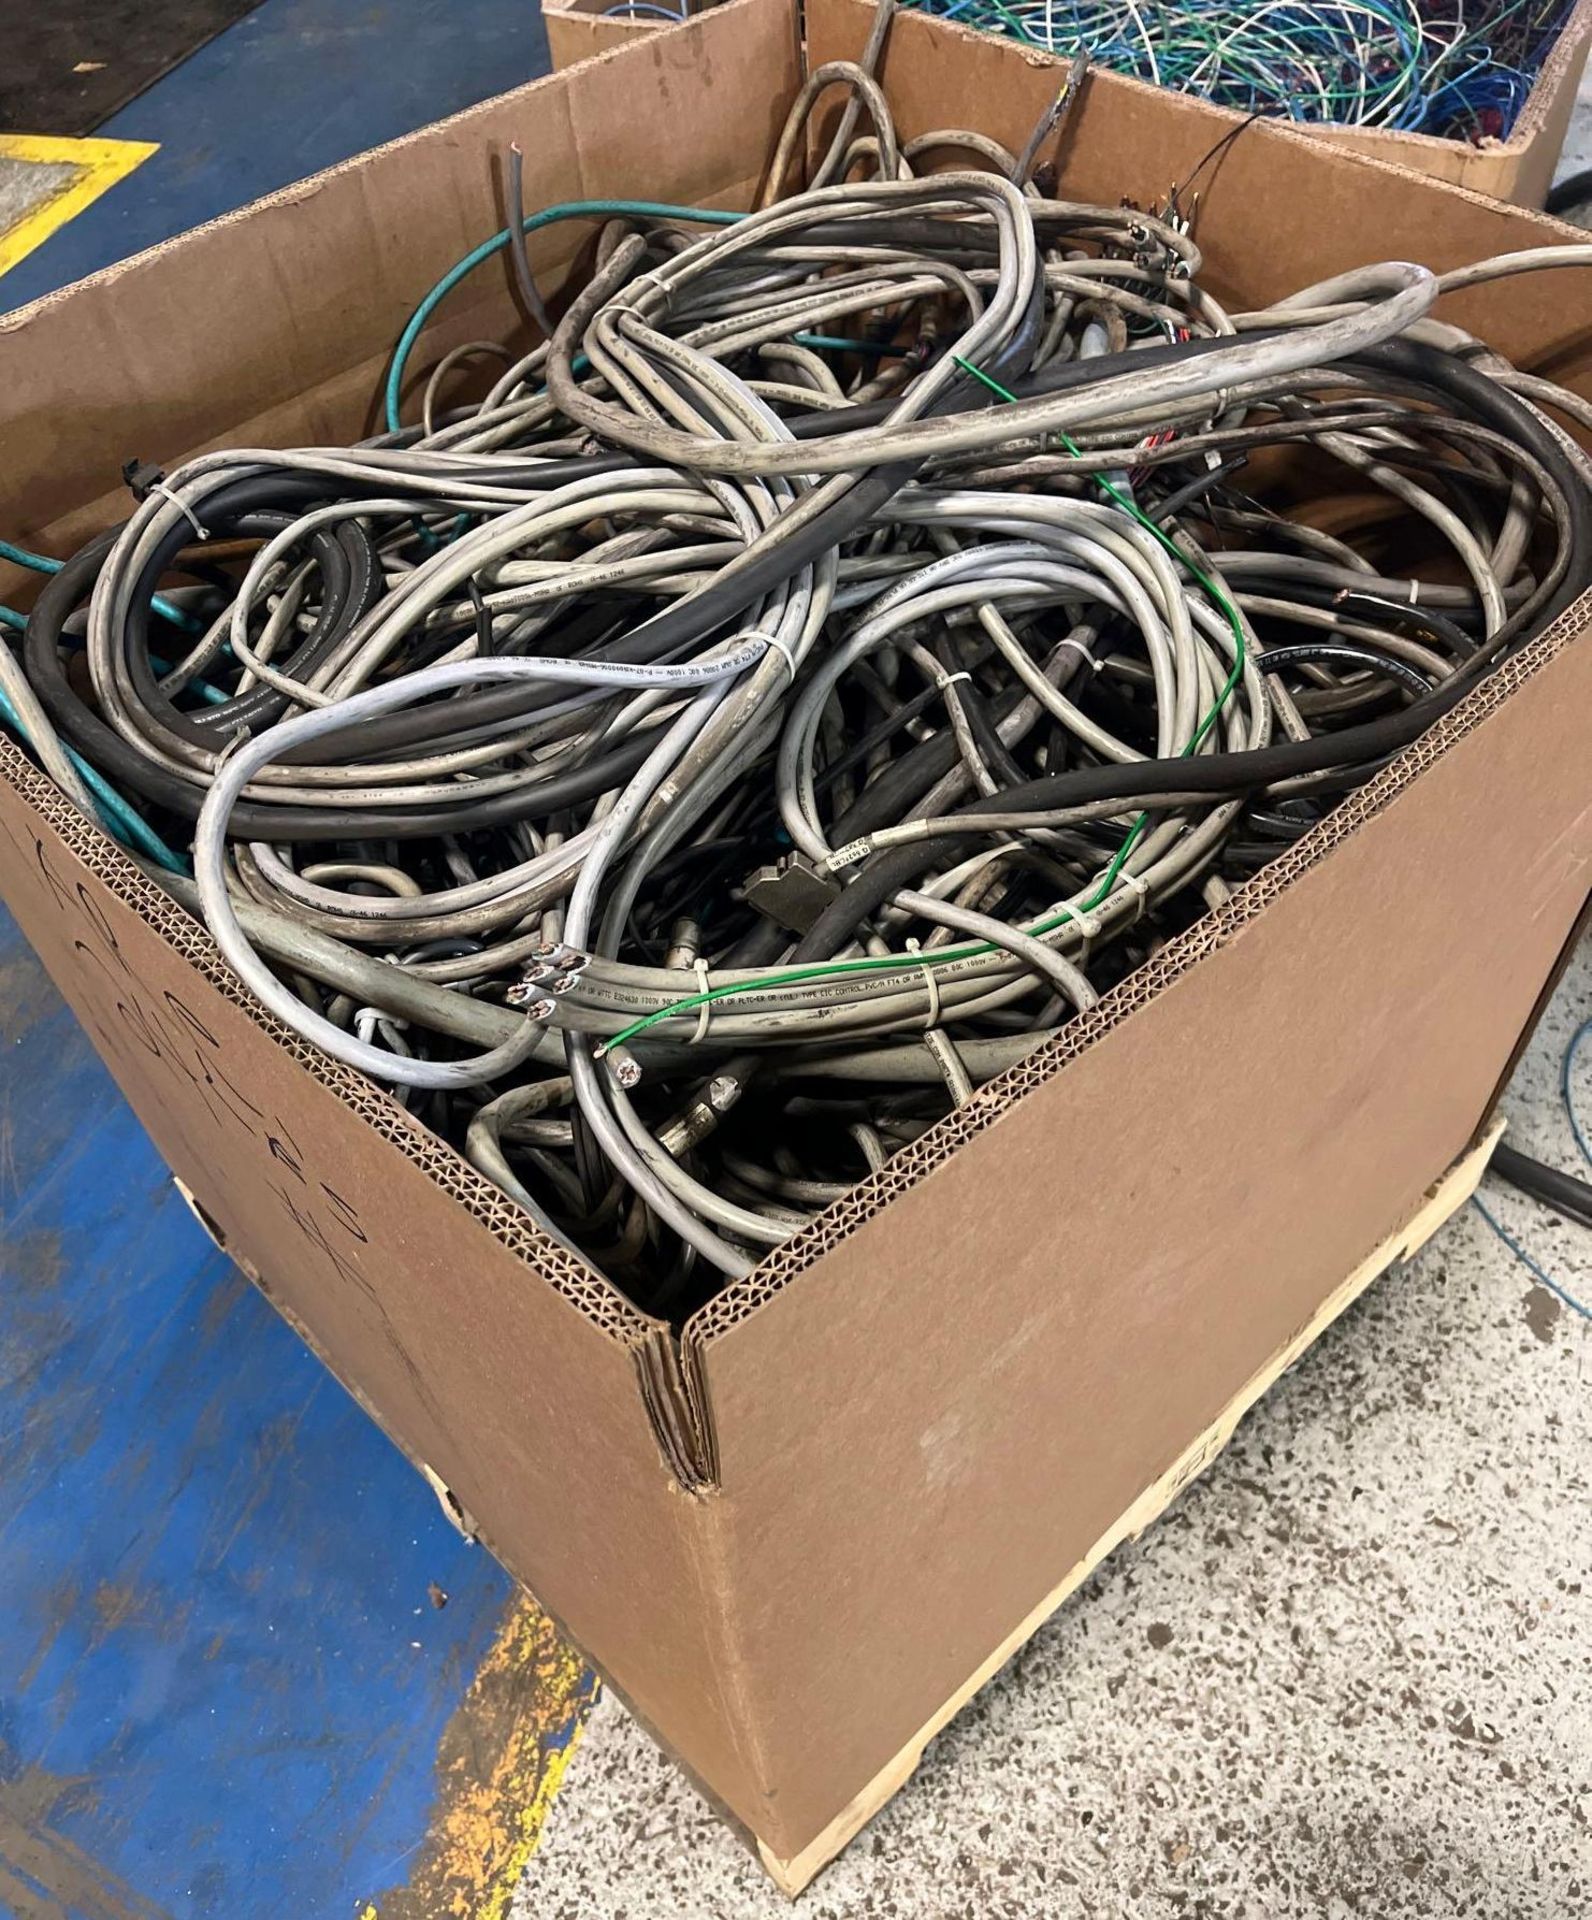 Scrap Wire (Insulated) 253 Lbs. (Includes Tare Weight) - Image 9 of 10